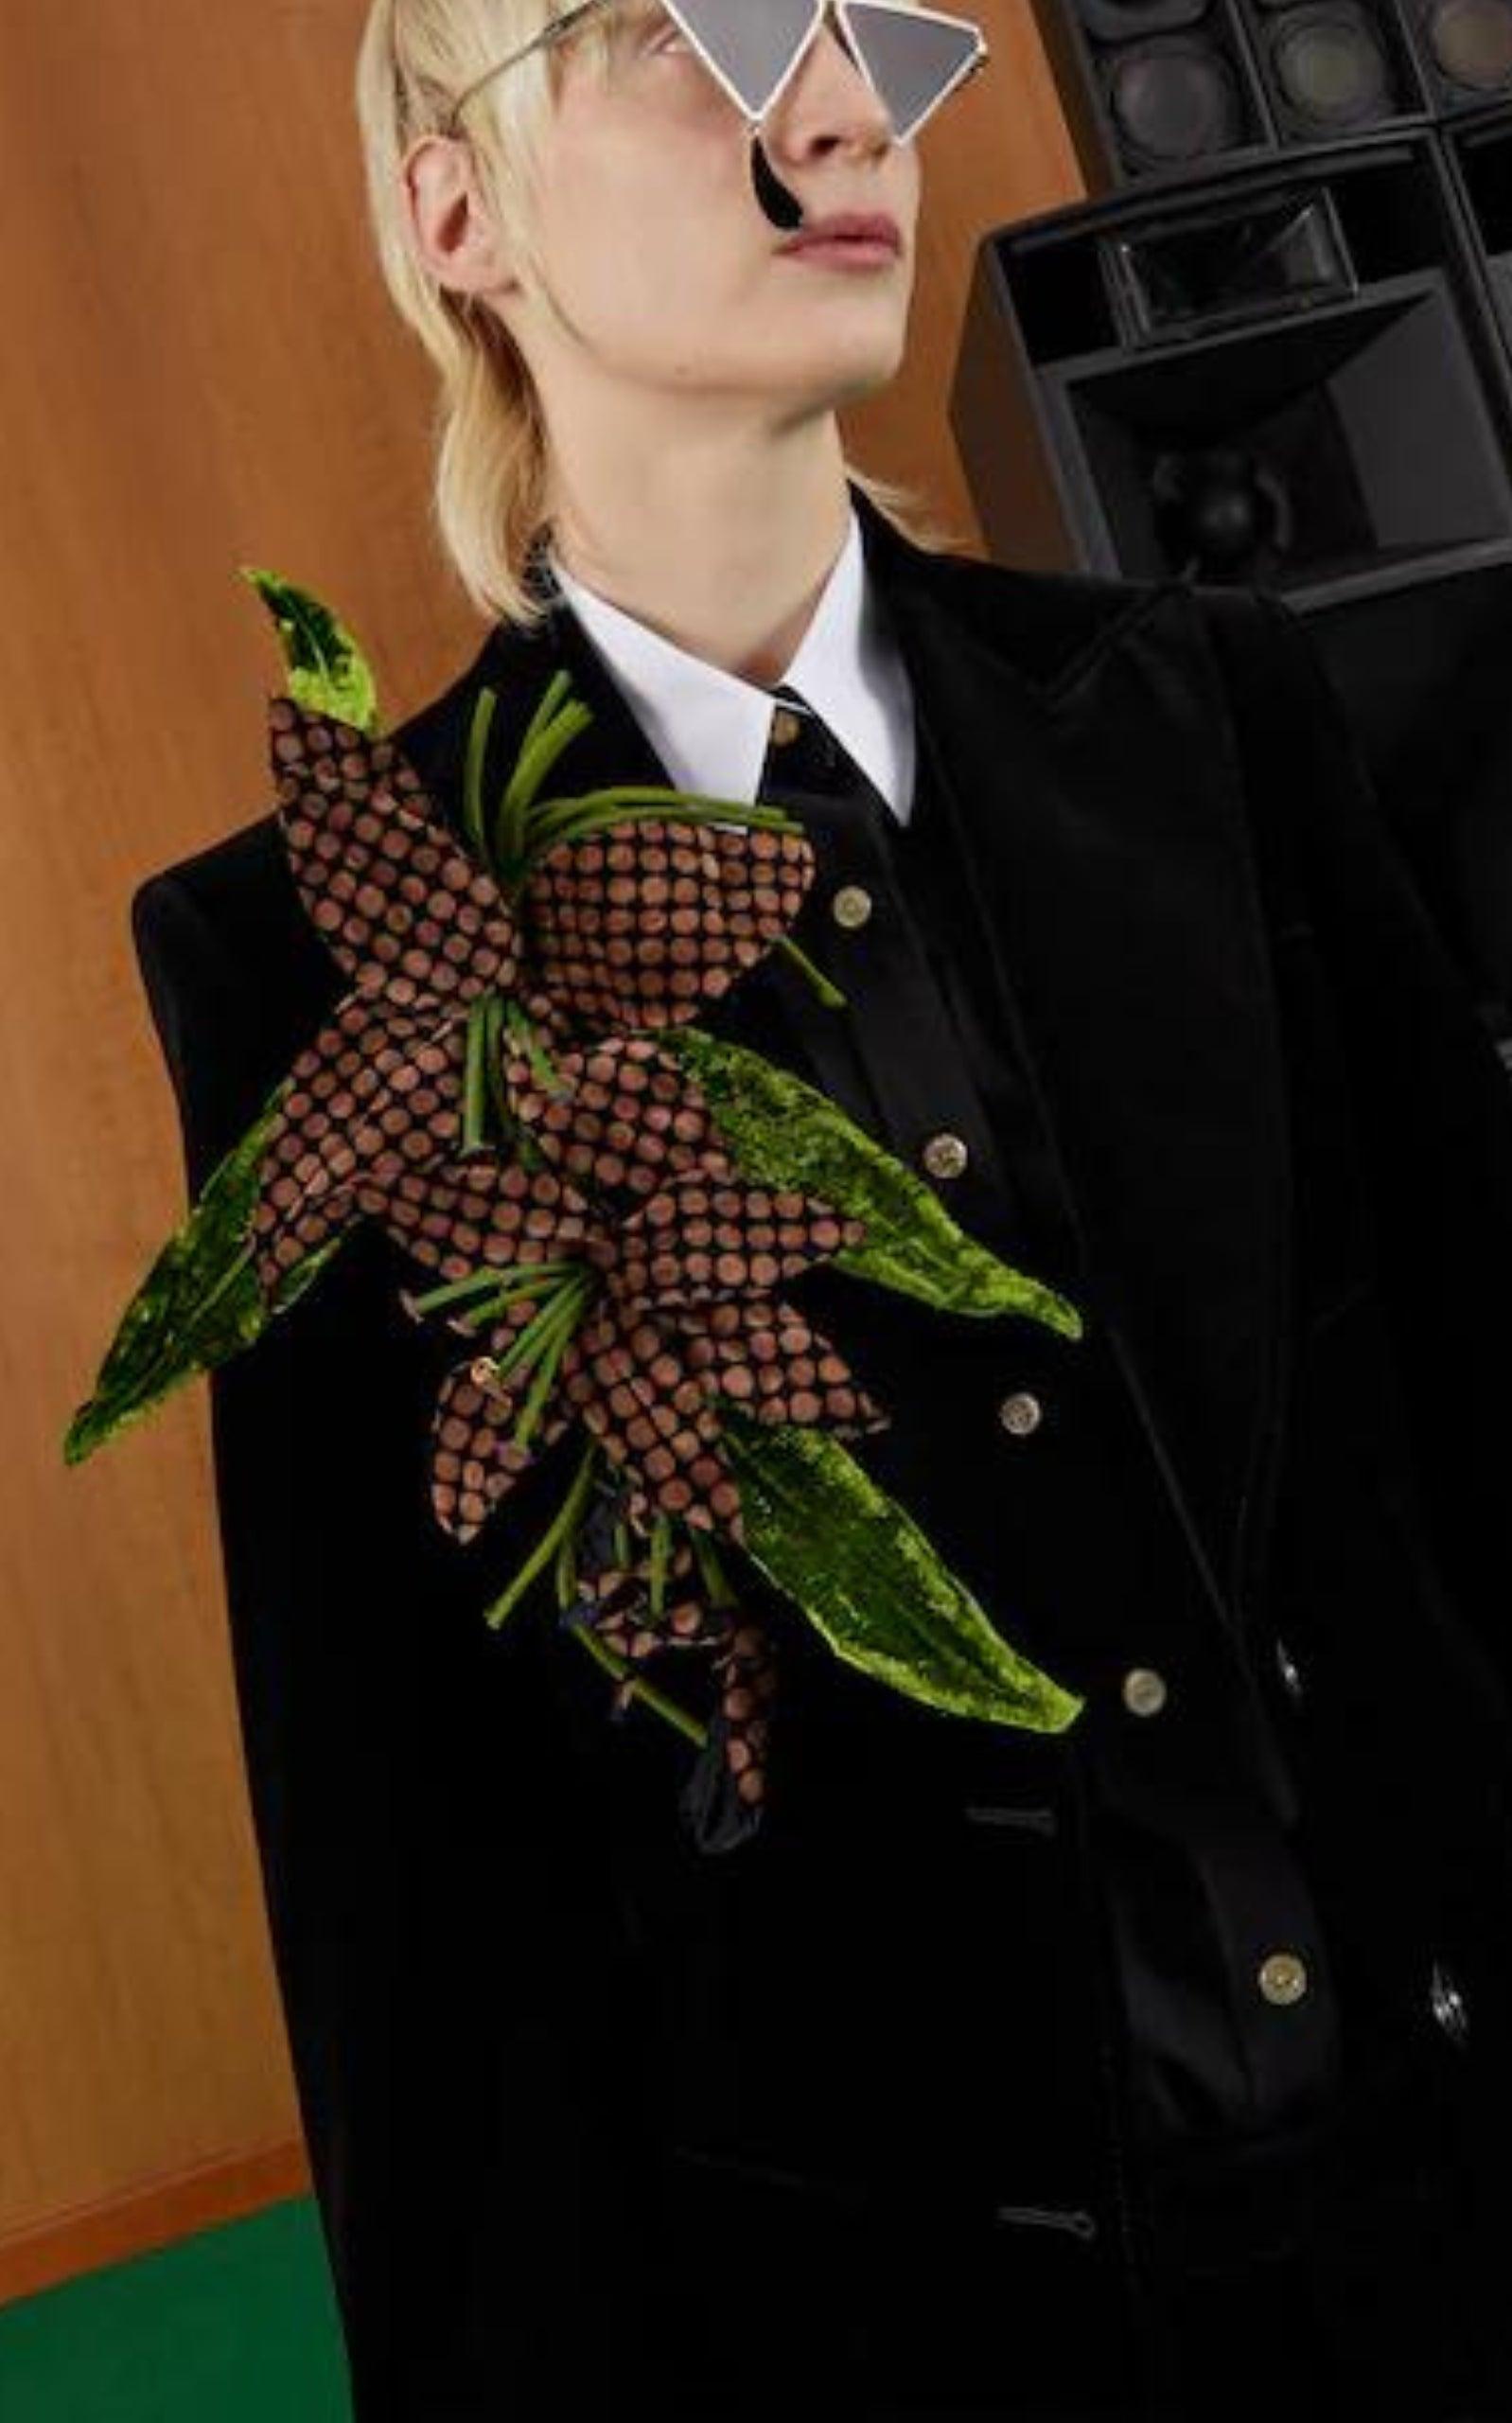  GucciCotton and Silk Flower Brooch - Runway Catalog